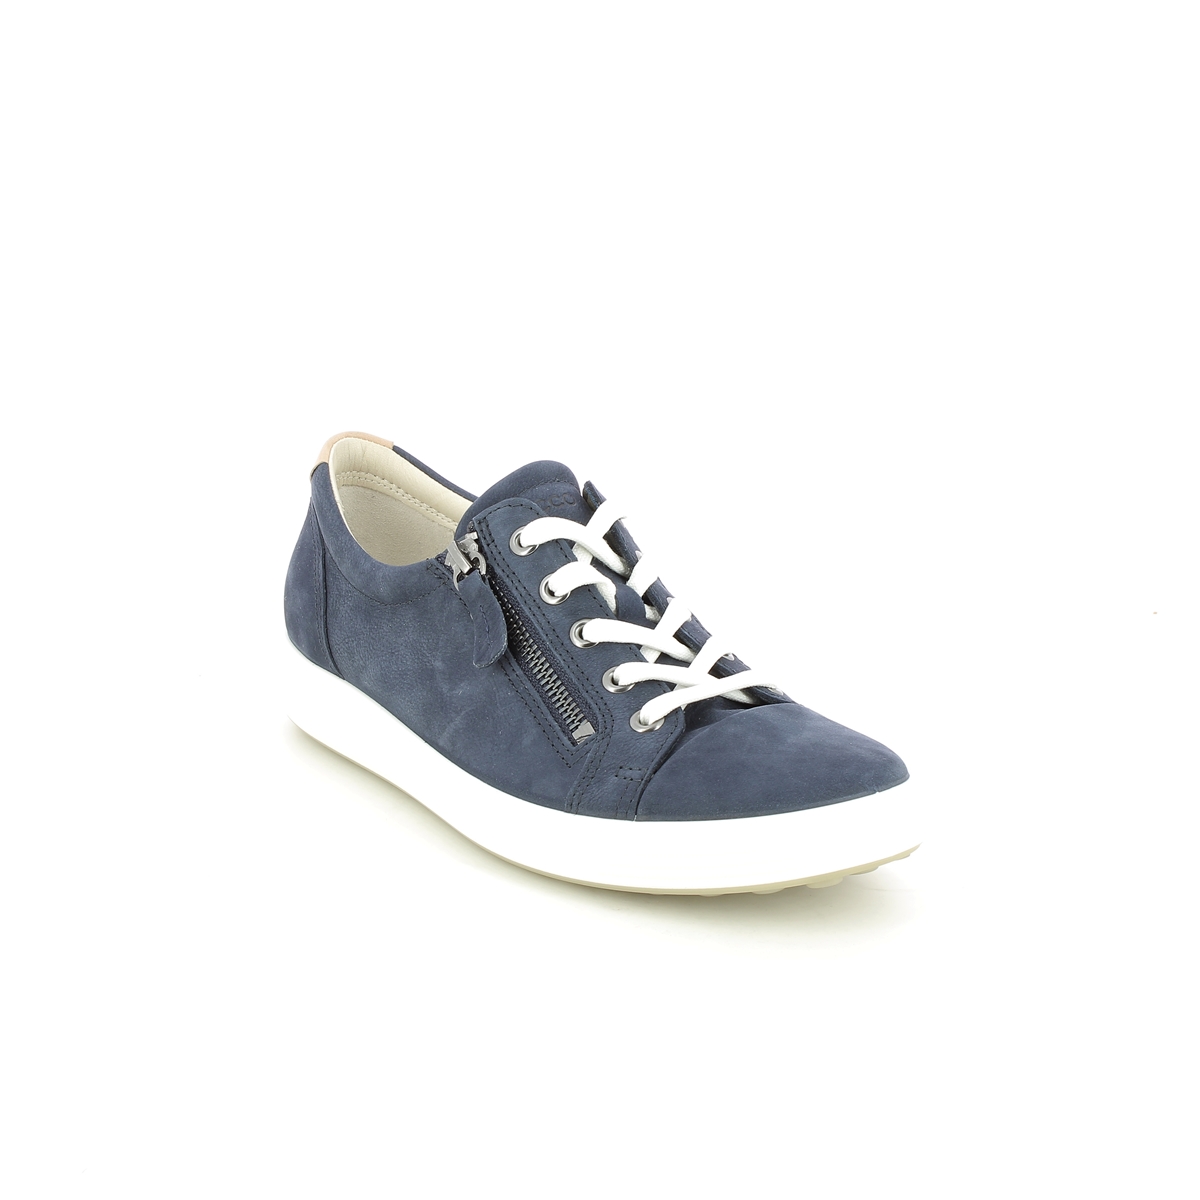 Ecco Soft 7 Lace Zip Navy Nubuck Womens Trainers 430853-02303 In Size 36 In Plain Navy Nubuck